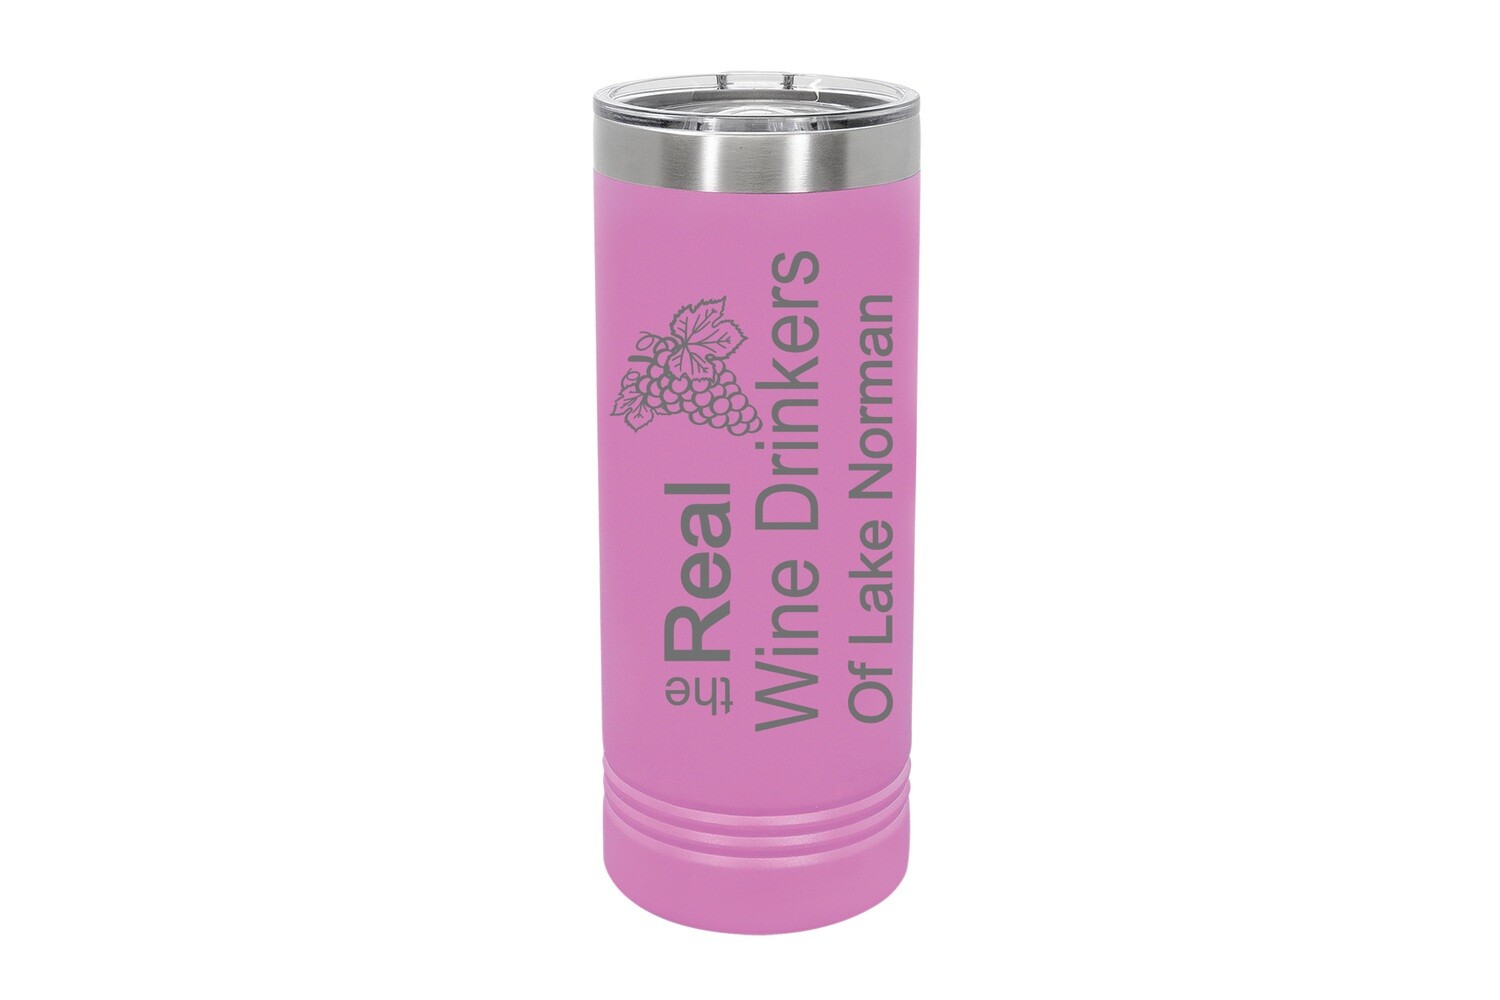 Skinny 22 oz The Real Wine Drinkers w/Grapes (Add Your Custom Location) Vertical Lettering Insulated Tumbler